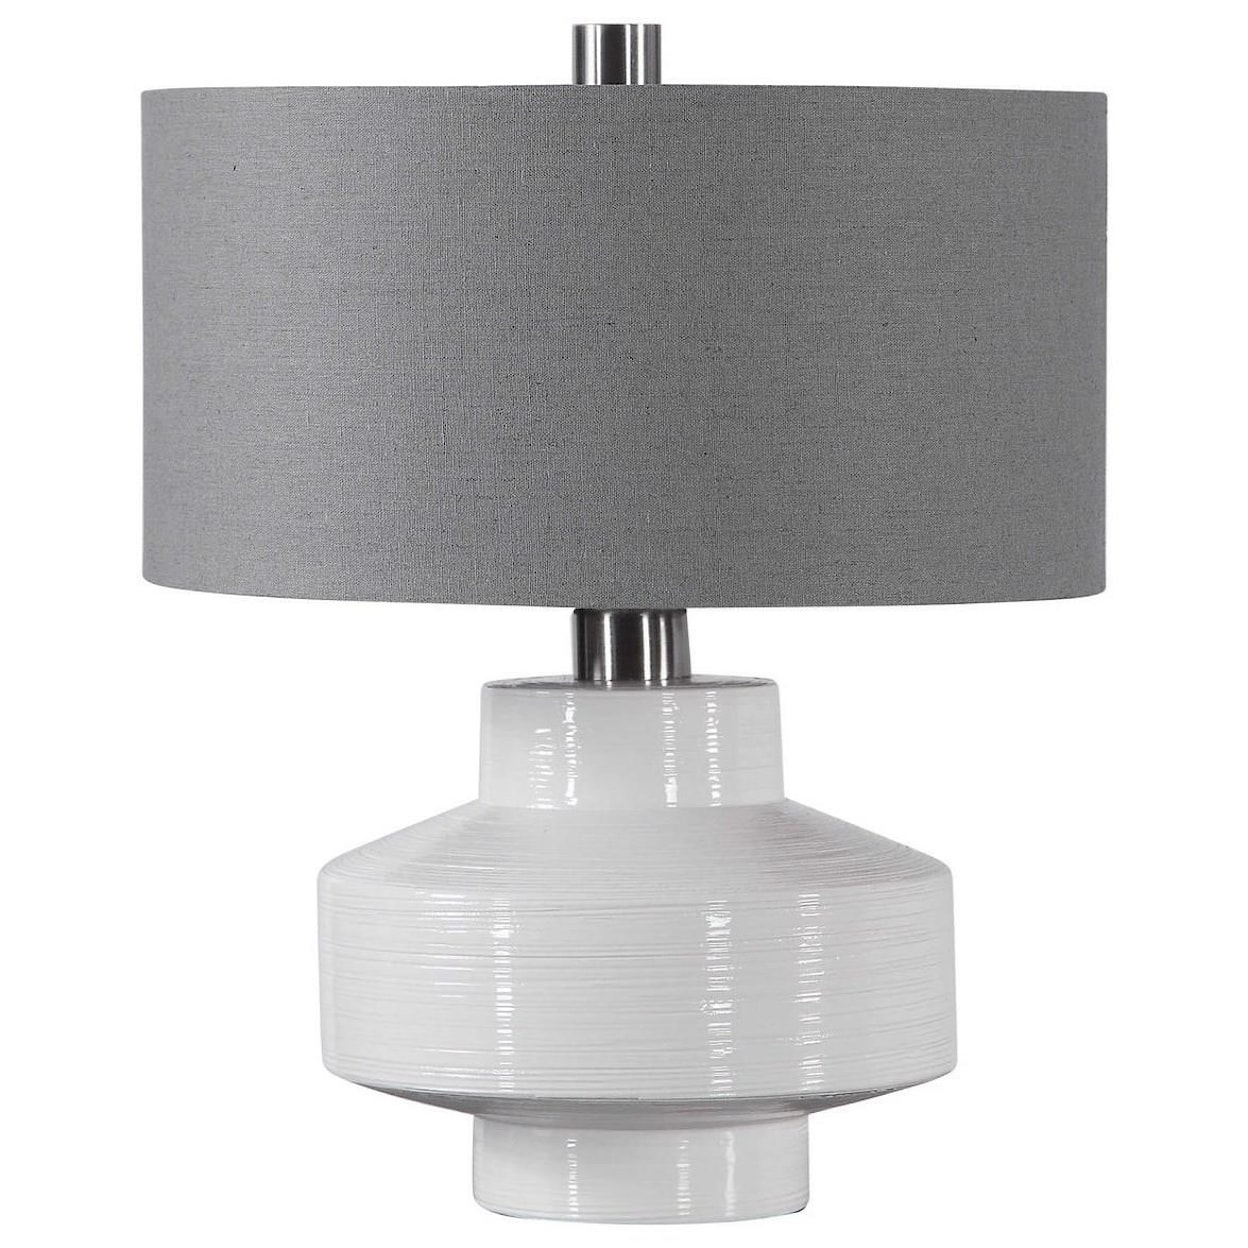 Uttermost Table Lamps Crosby Mid-Century Table Lamp